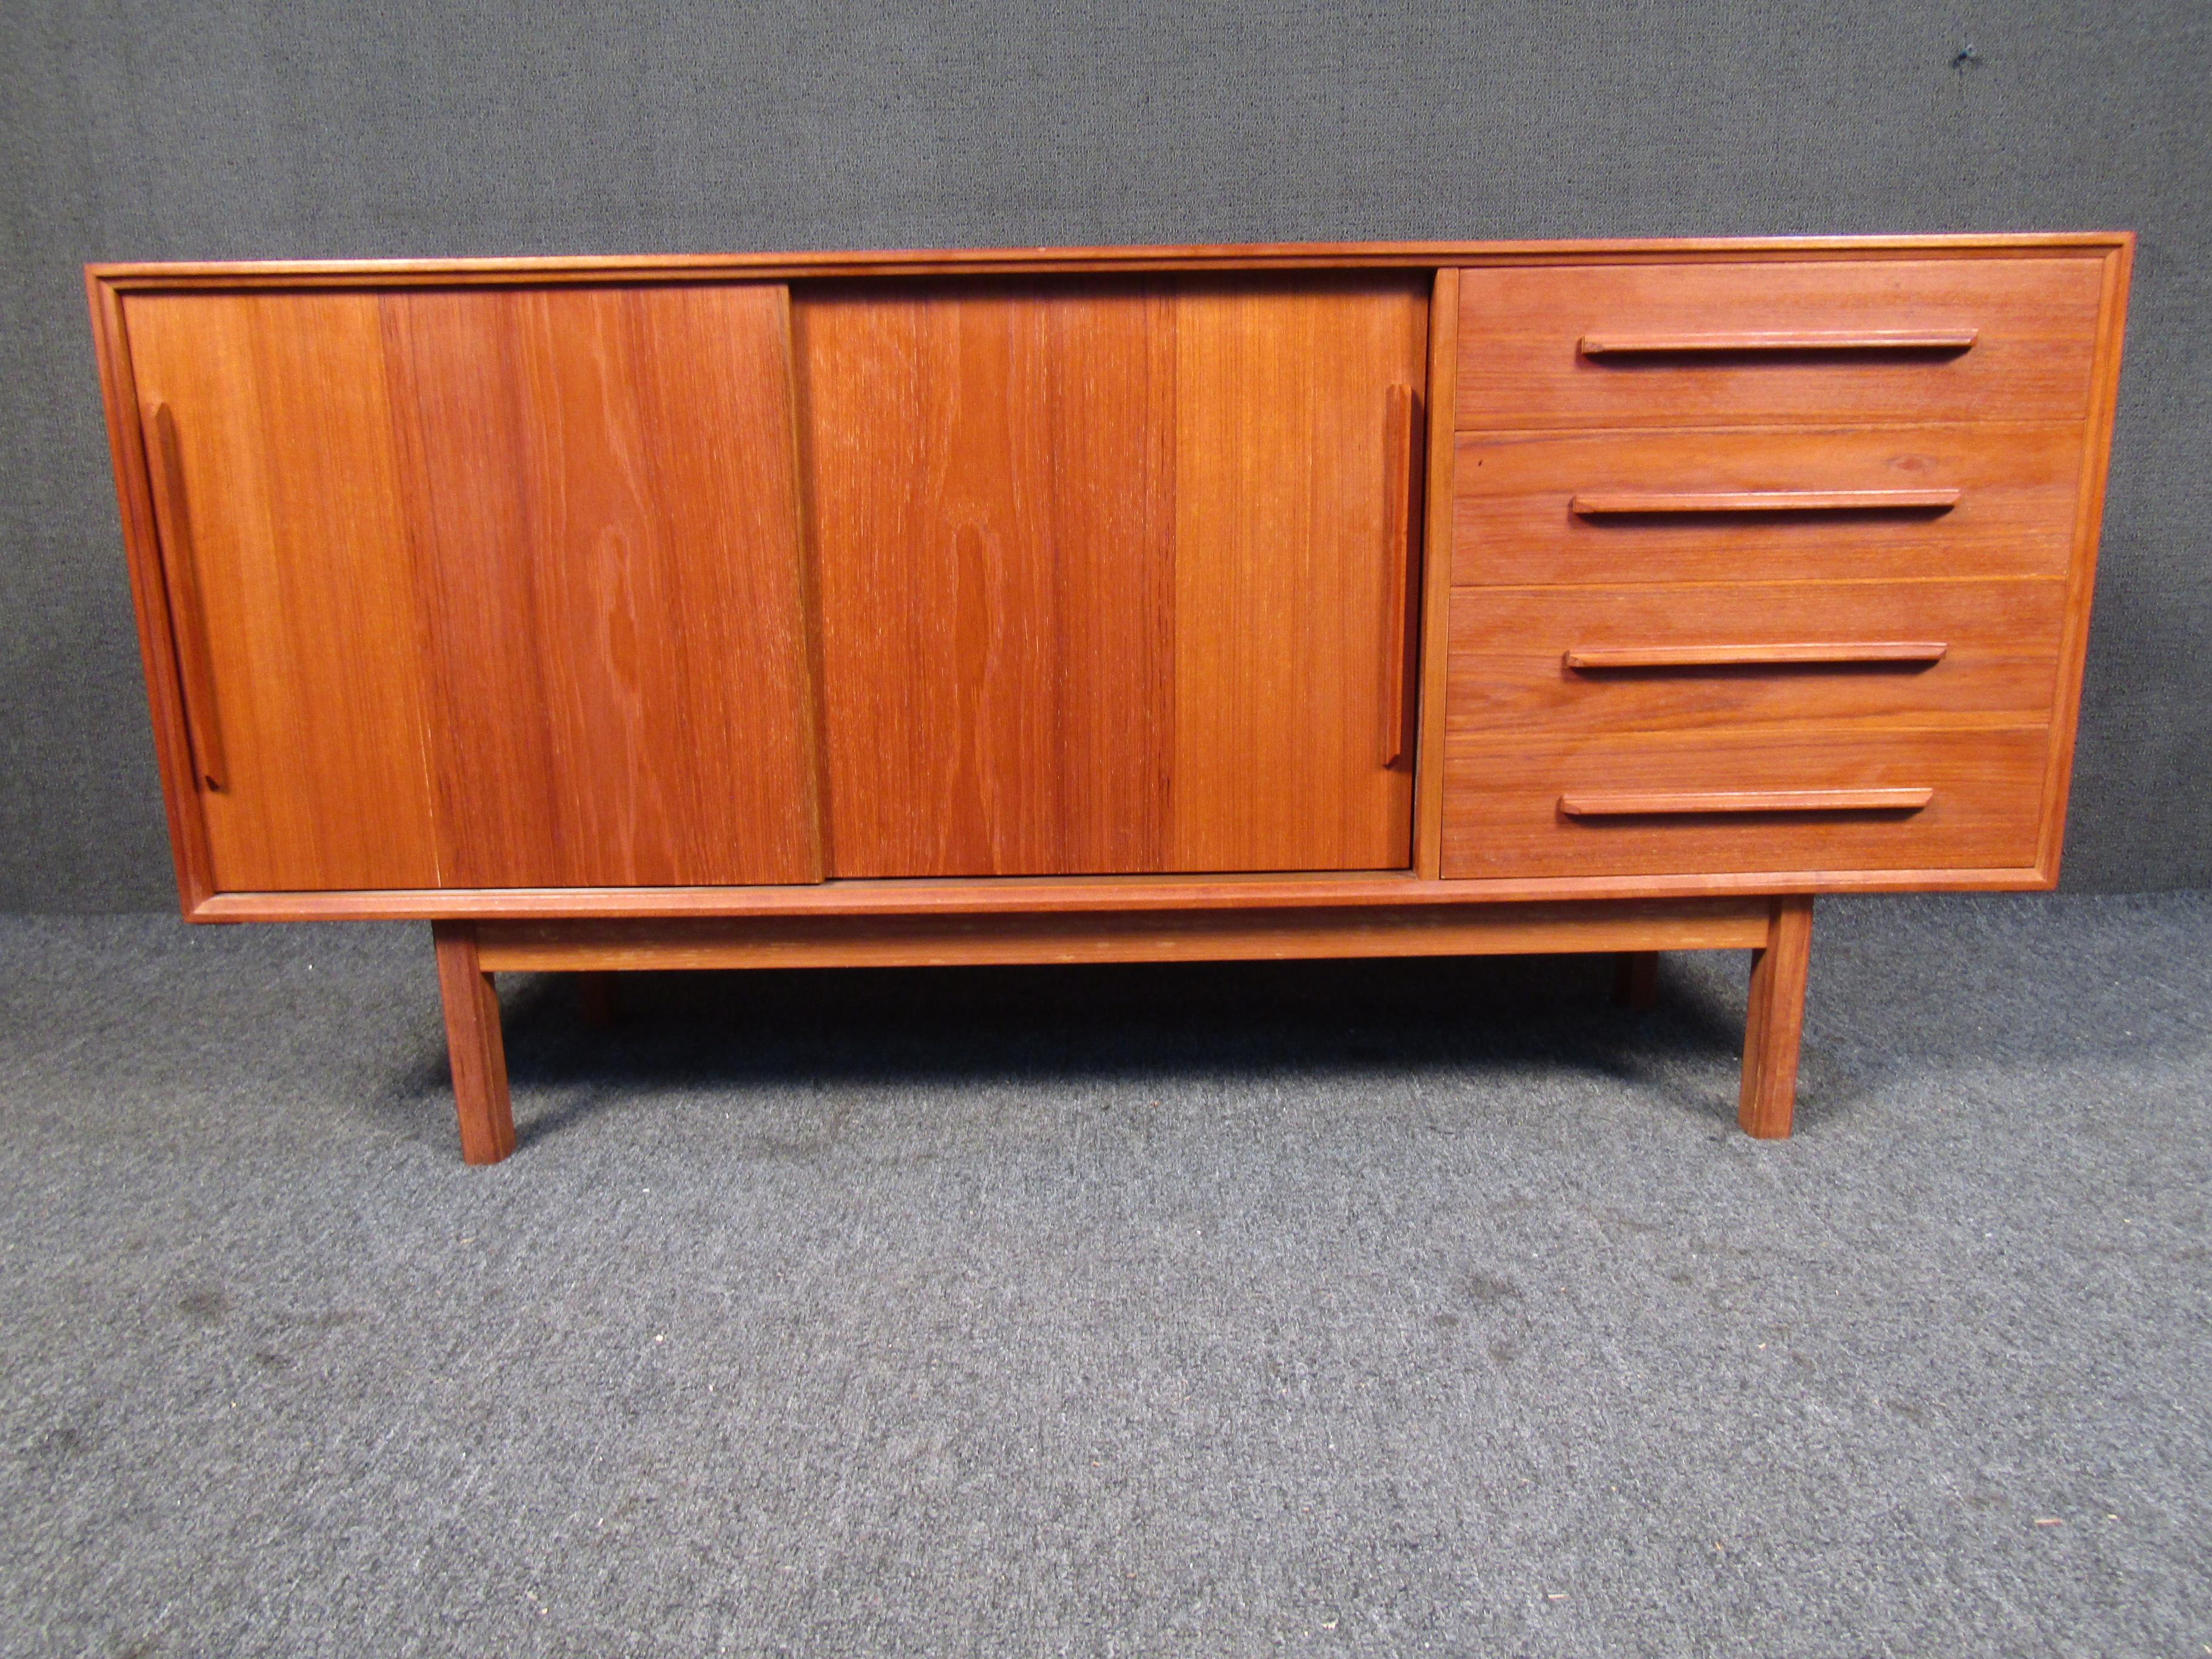 This vintage Danish sideboard shows off a rich teak woodgrain paired with plenty of drawer and storage space. Please confirm item location with seller (NY/NJ).